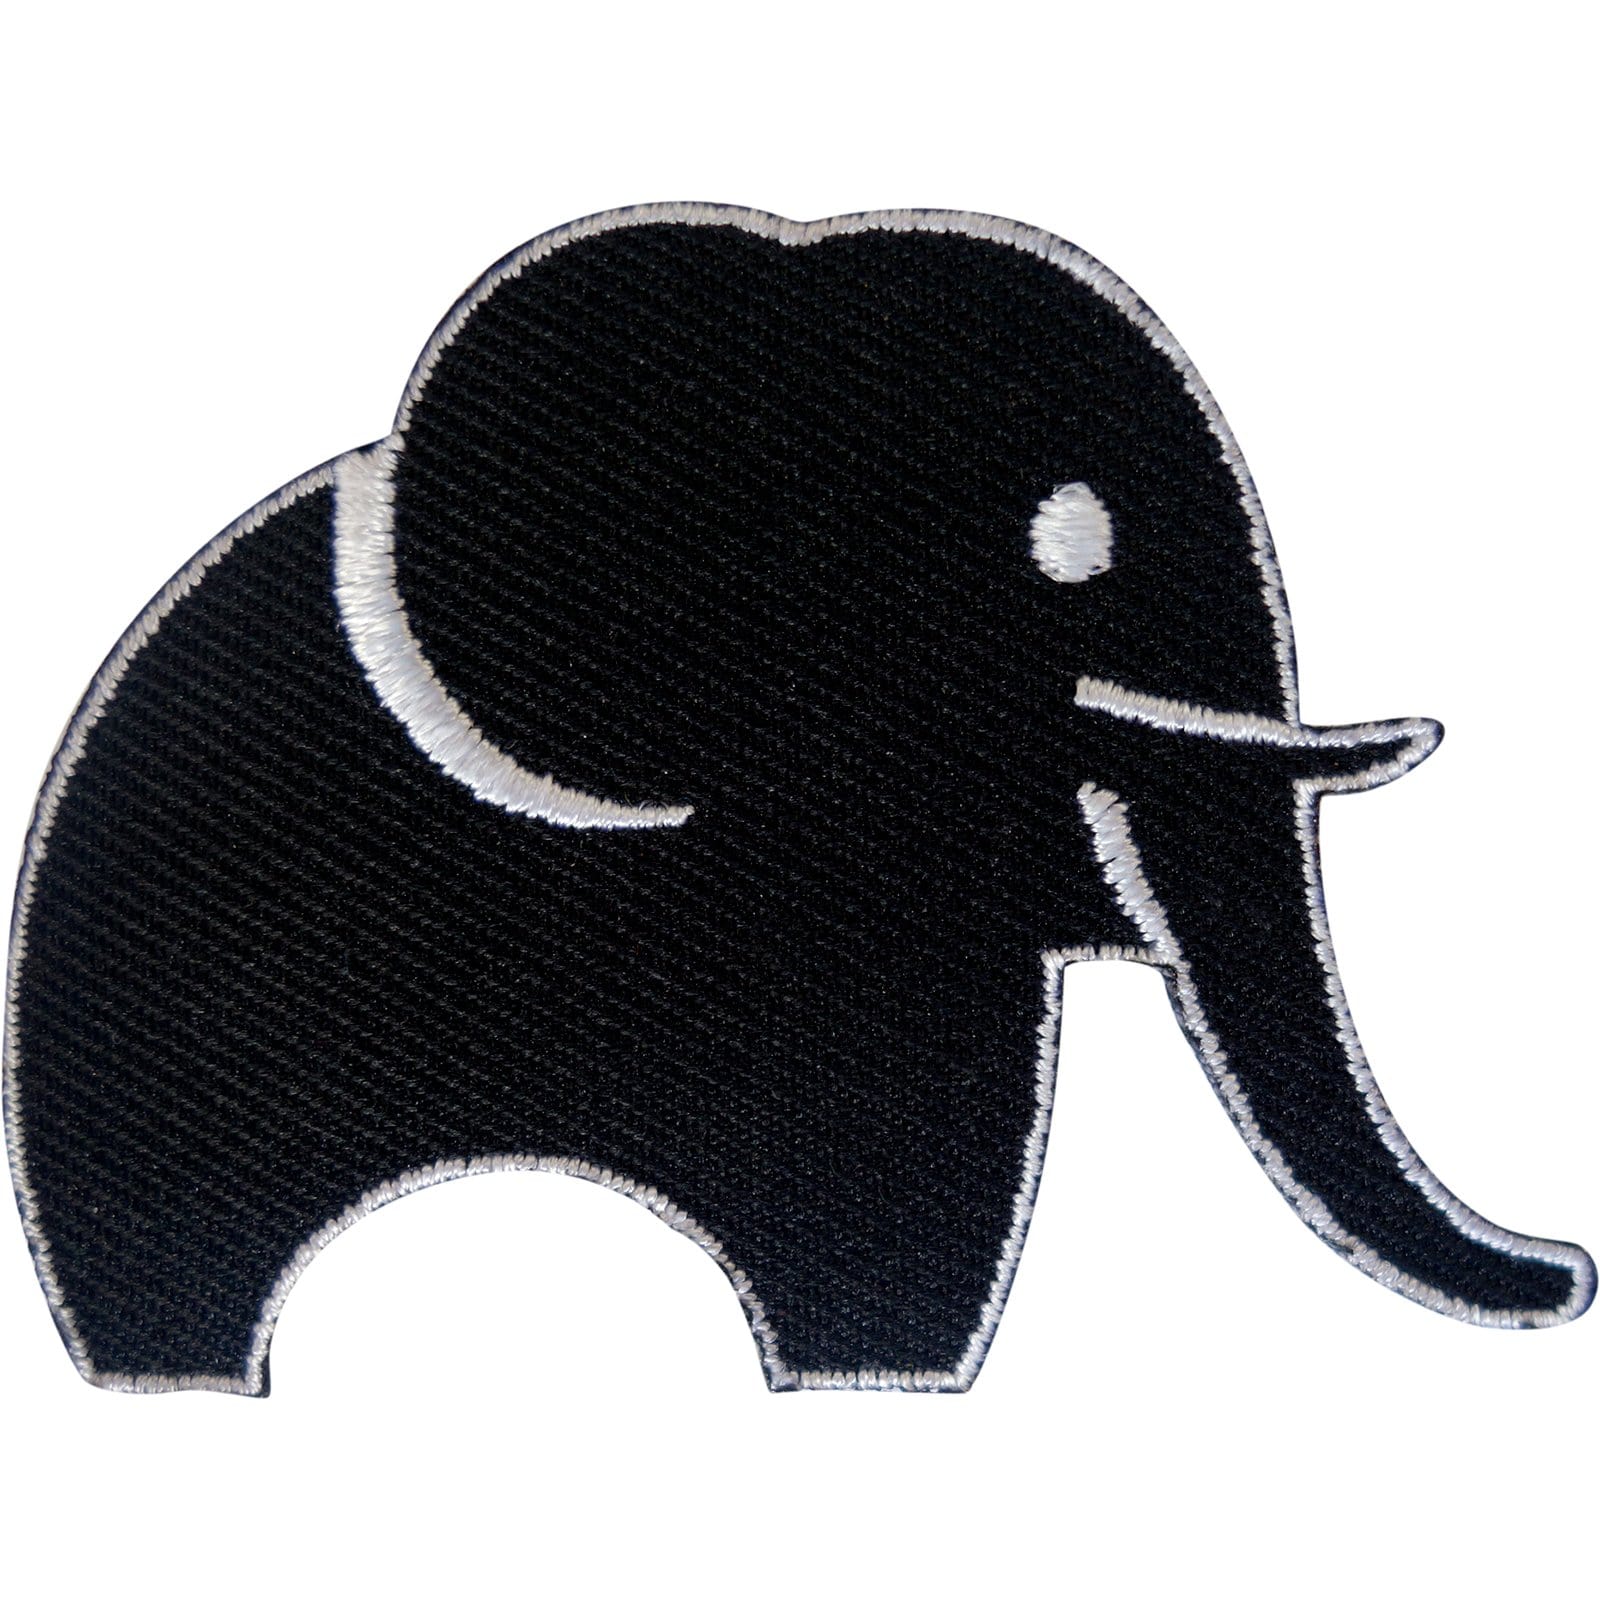 Elephant Patch Iron Sew On Clothes Bag Animal Embroidered Badge Crafts Applique